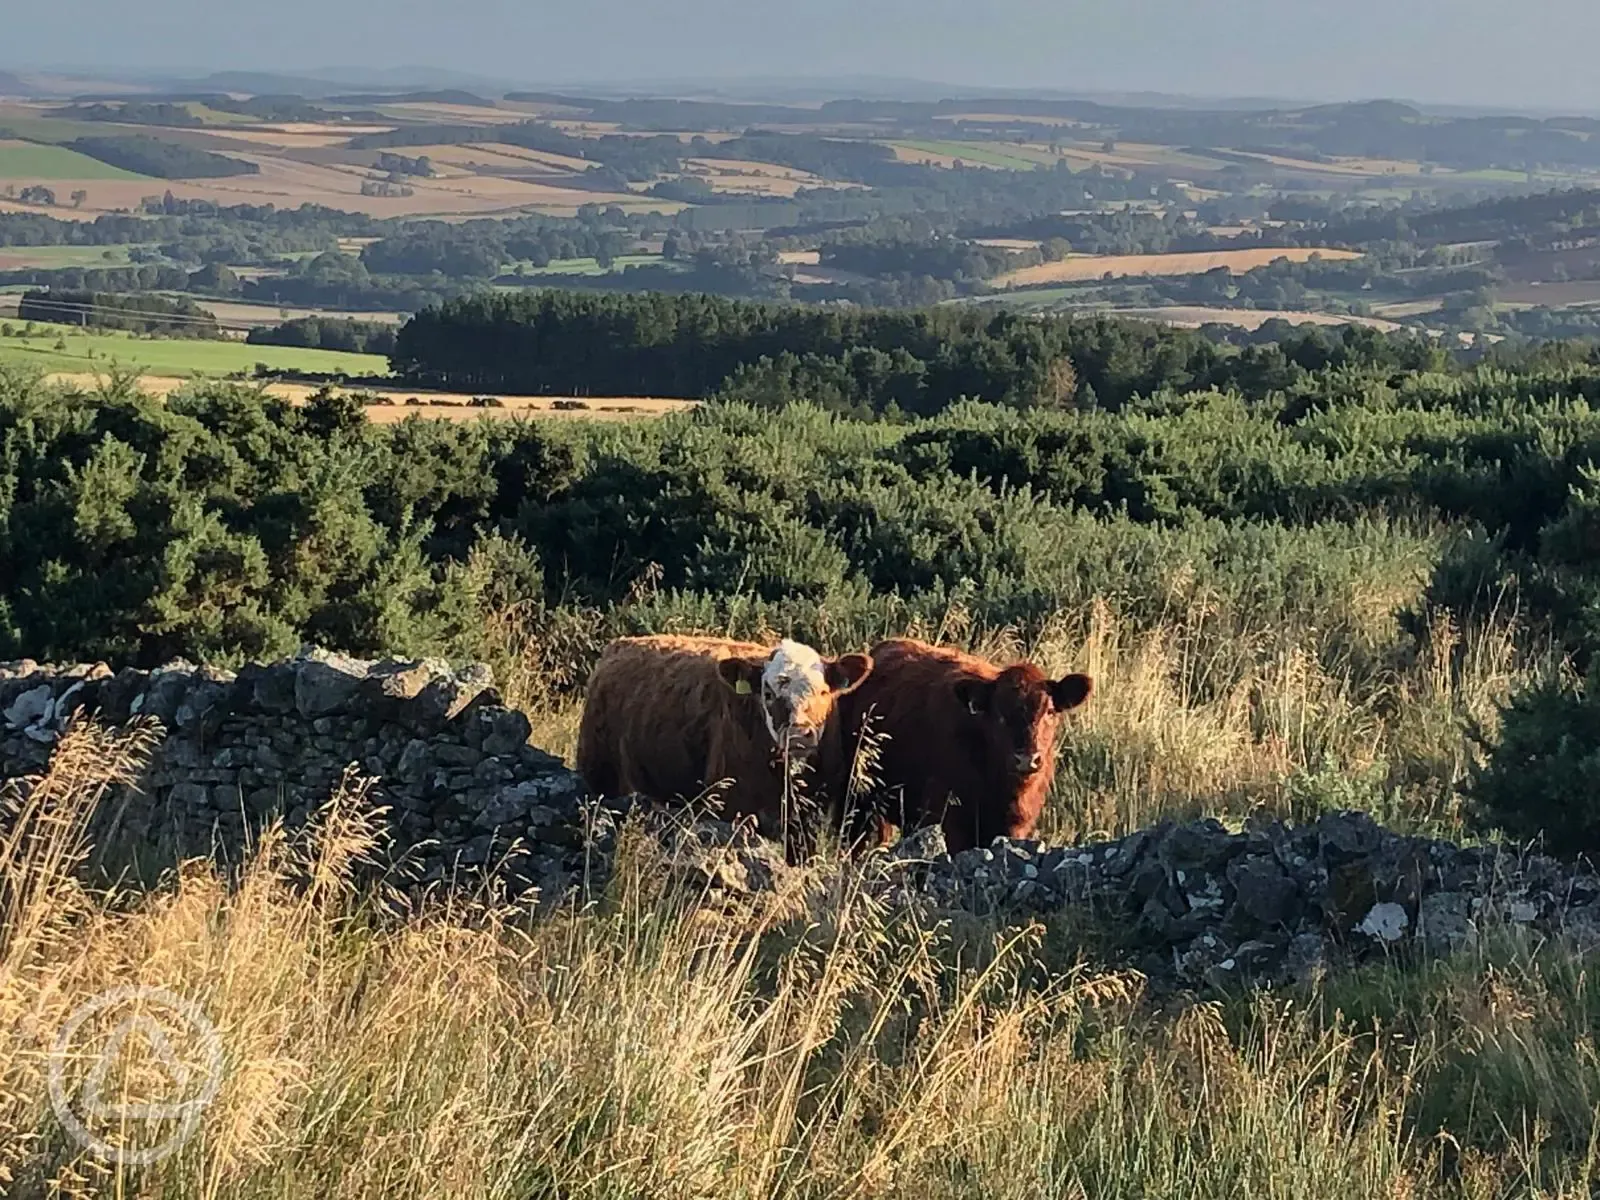 Our cows, high on Ruberslaw Hill, have the best views!